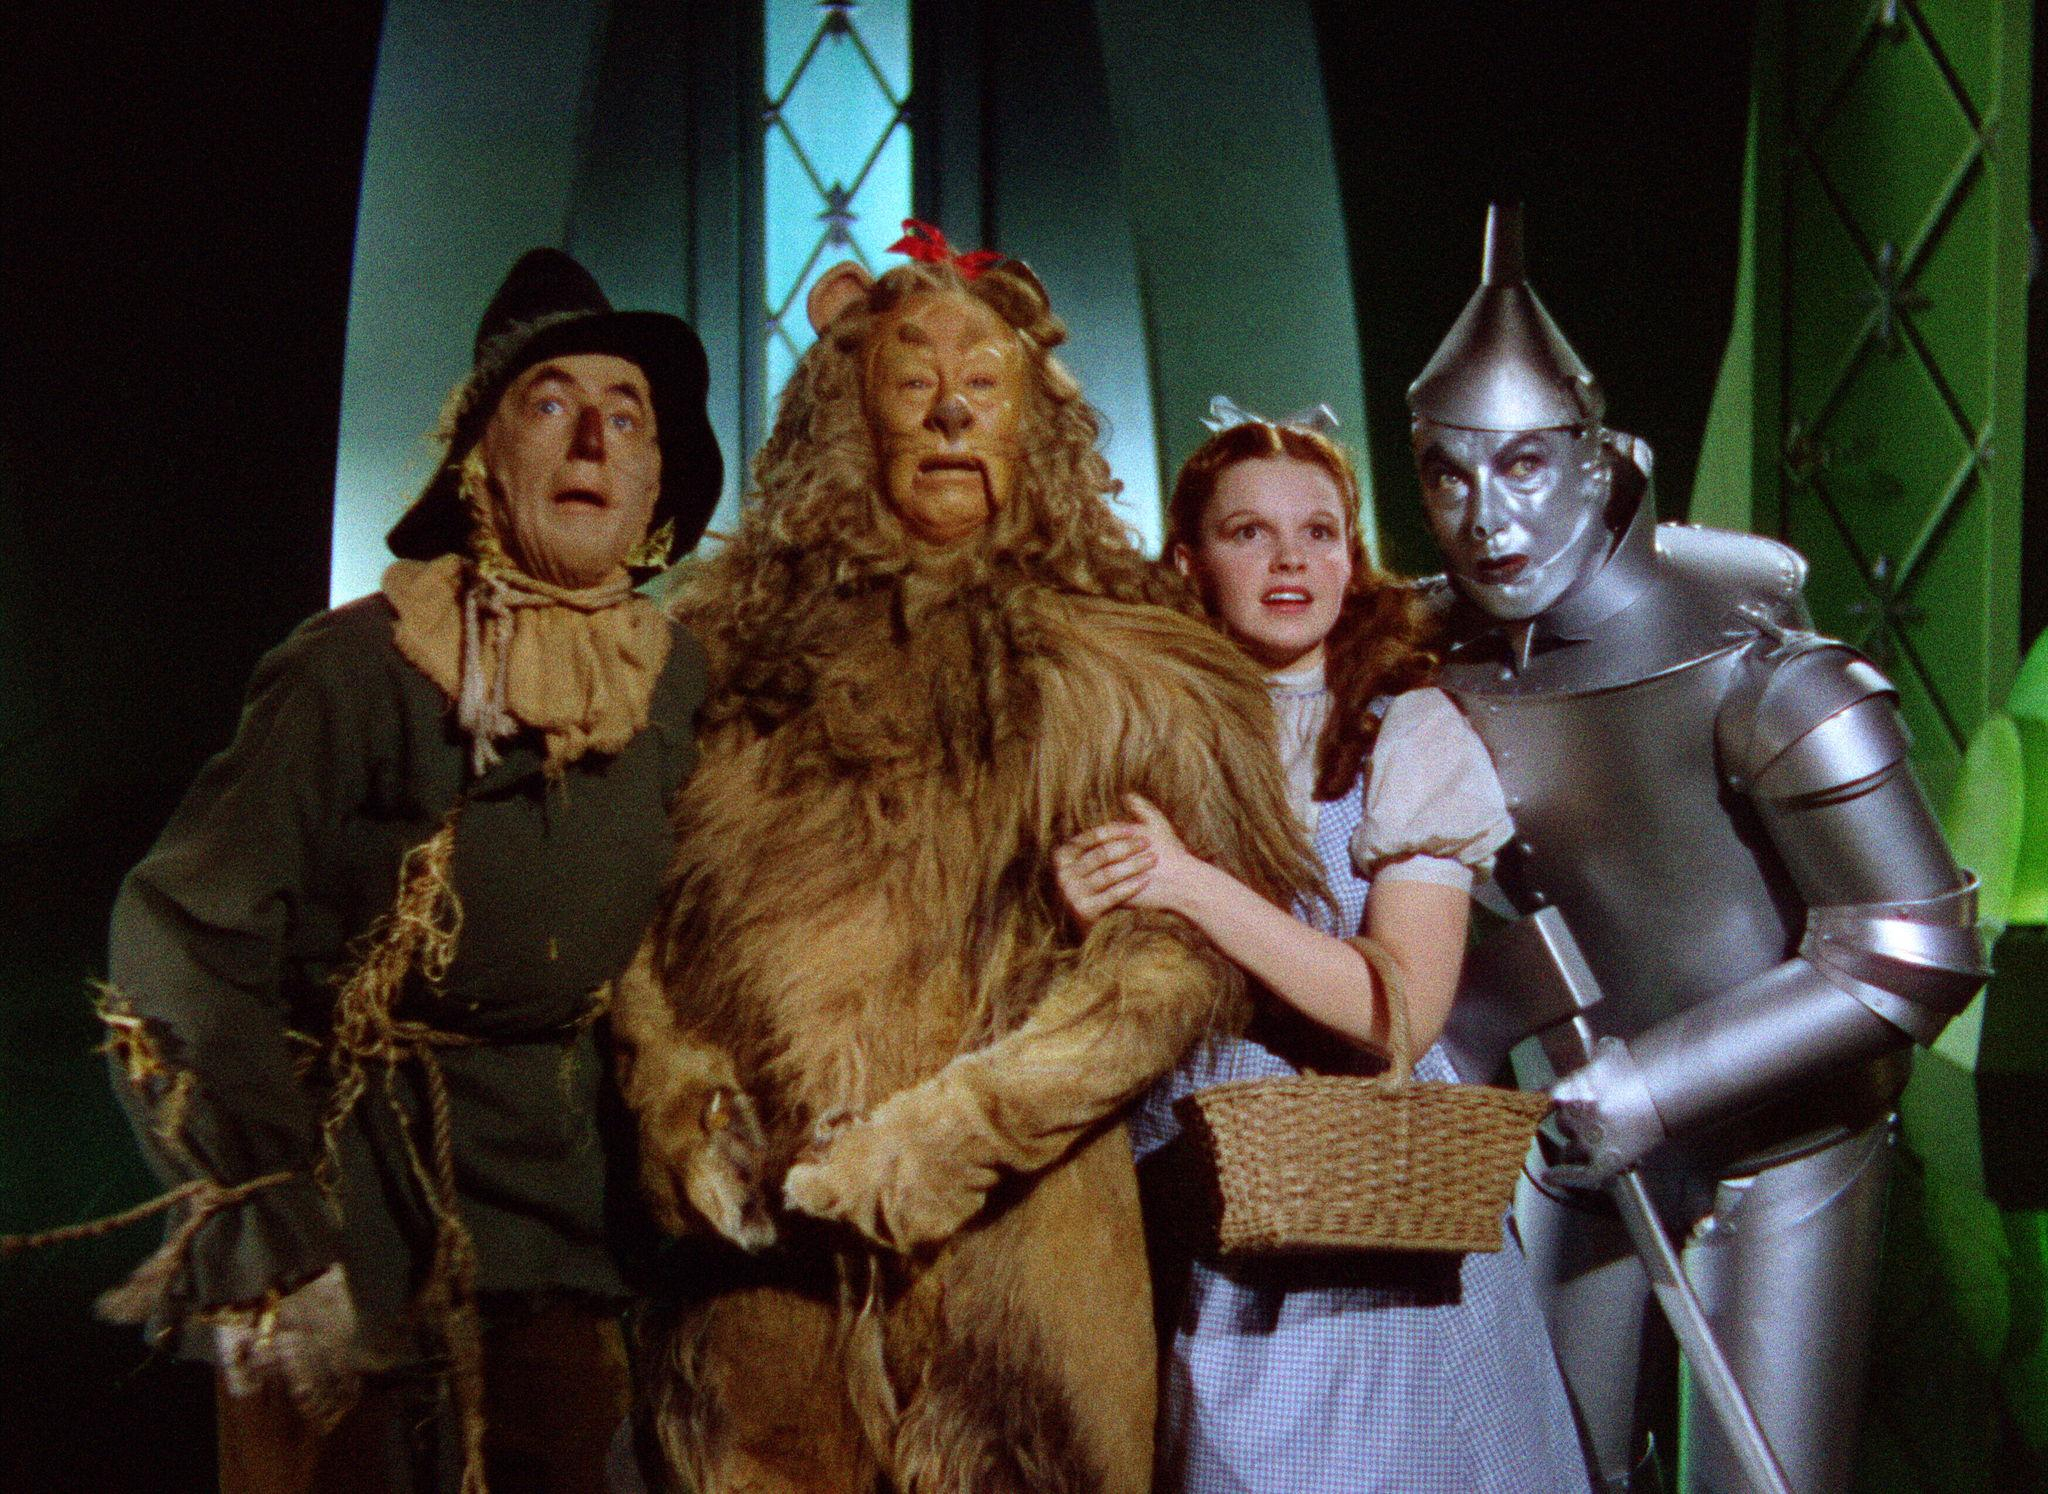 2048x1494 80+ The Wizard Of Oz (1939) HD Wallpapers and Backgrounds